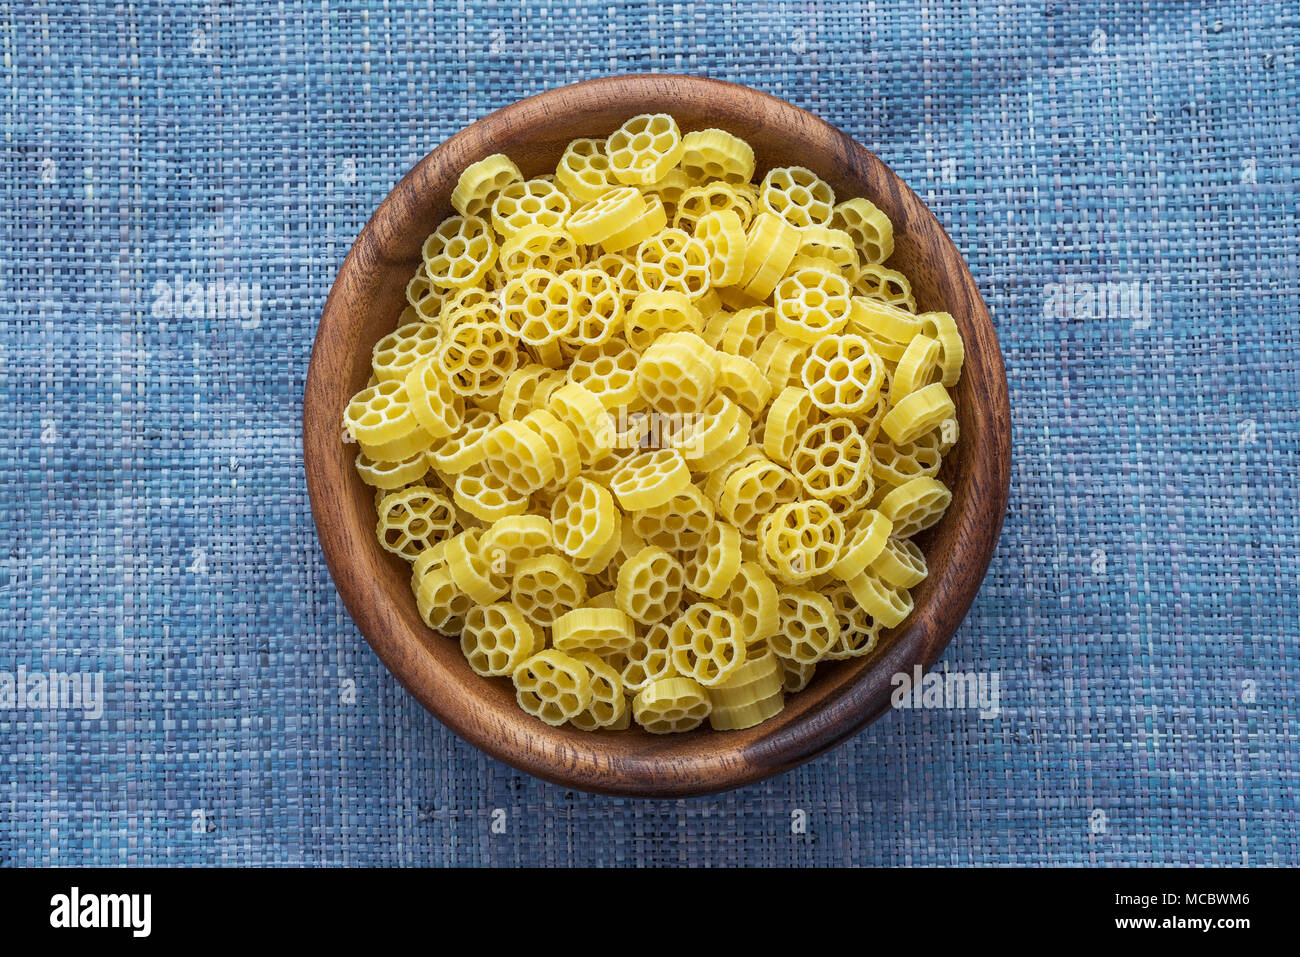 Macaroni ruote pasta in a wooden bowl on a blue knitted background in the center. Close-up with the top. Stock Photo